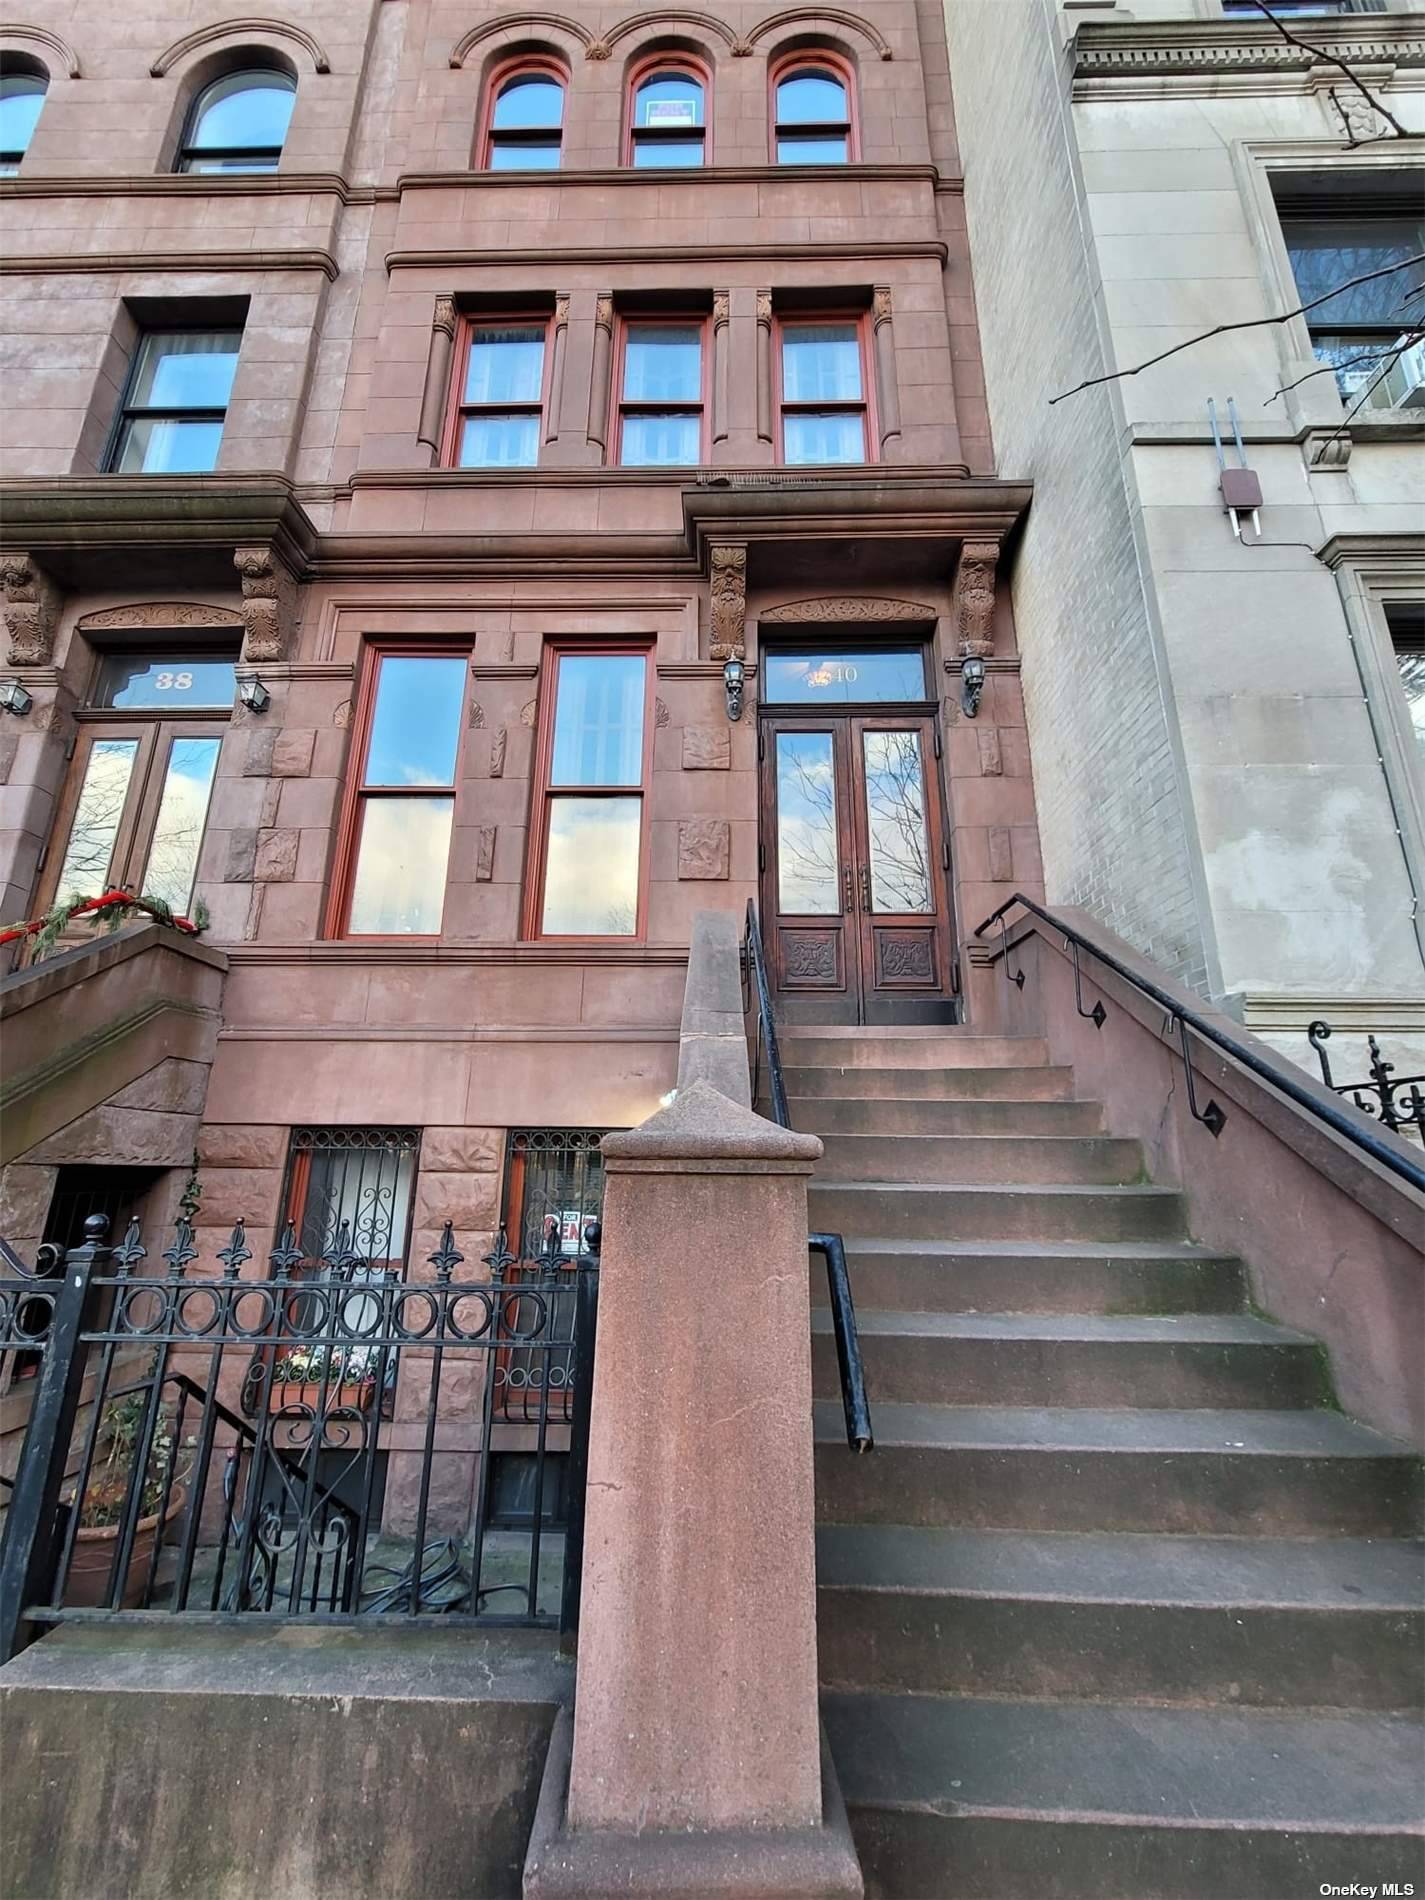 Lovely amp ; Spacious one bedroom apartment with one and half bath located in South Harlem, close to shops, Restaurant, Public Transportation, Subway, Central Park amp ; Marcus Garvey Park ...